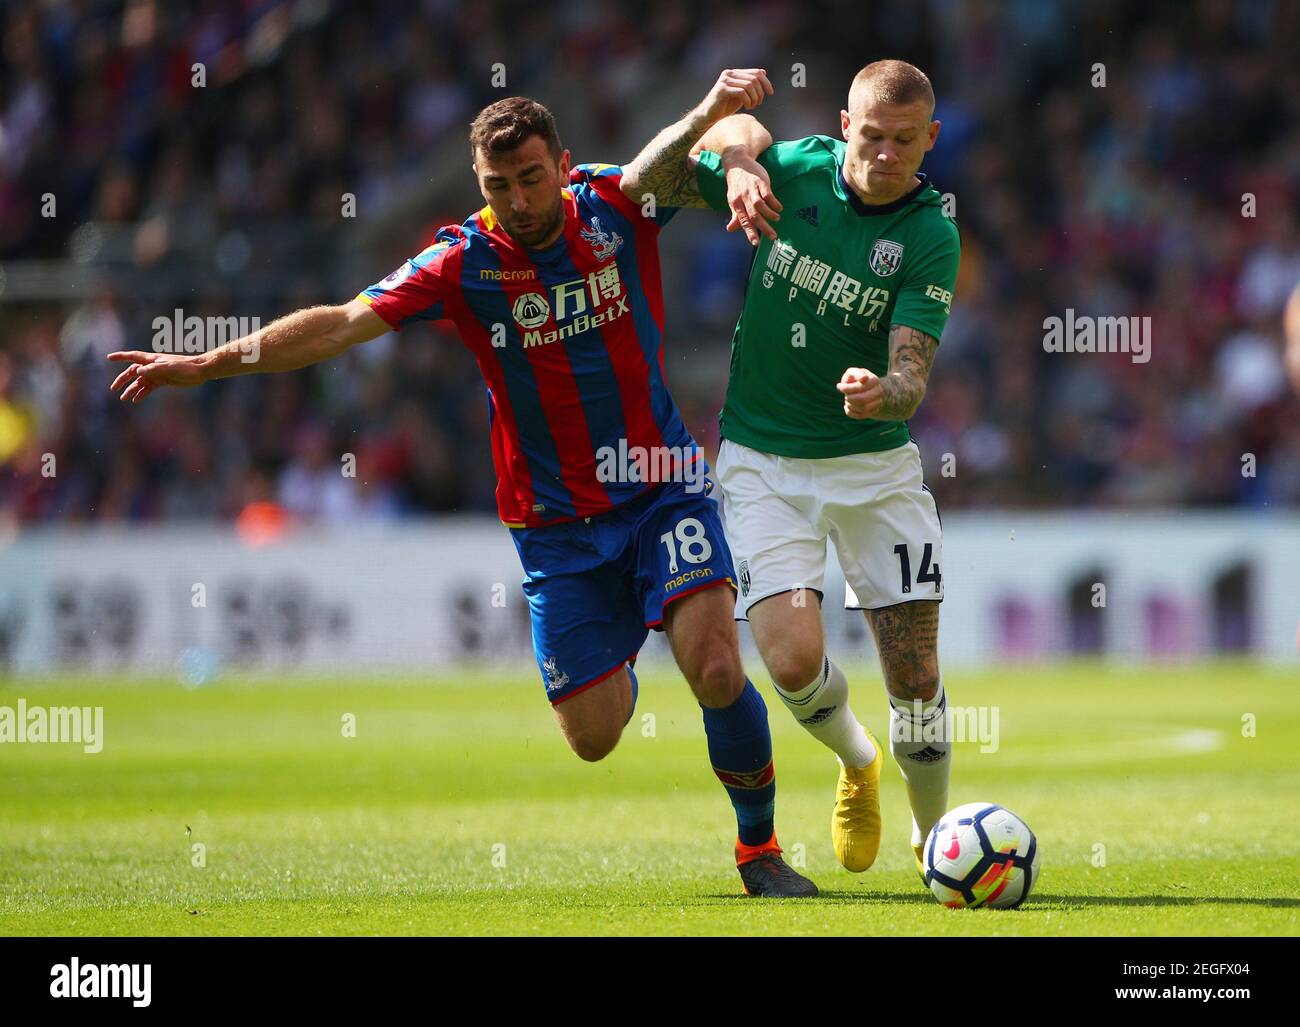 Soccer Football - Premier League - Crystal Palace vs West Bromwich Albion - Selhurst Park, London, Britain - May 13, 2018   Crystal Palace's James McArthur in action with West Bromwich Albion's James McClean    REUTERS/Hannah McKay    EDITORIAL USE ONLY. No use with unauthorized audio, video, data, fixture lists, club/league logos or 'live' services. Online in-match use limited to 75 images, no video emulation. No use in betting, games or single club/league/player publications.  Please contact your account representative for further details. Stock Photo